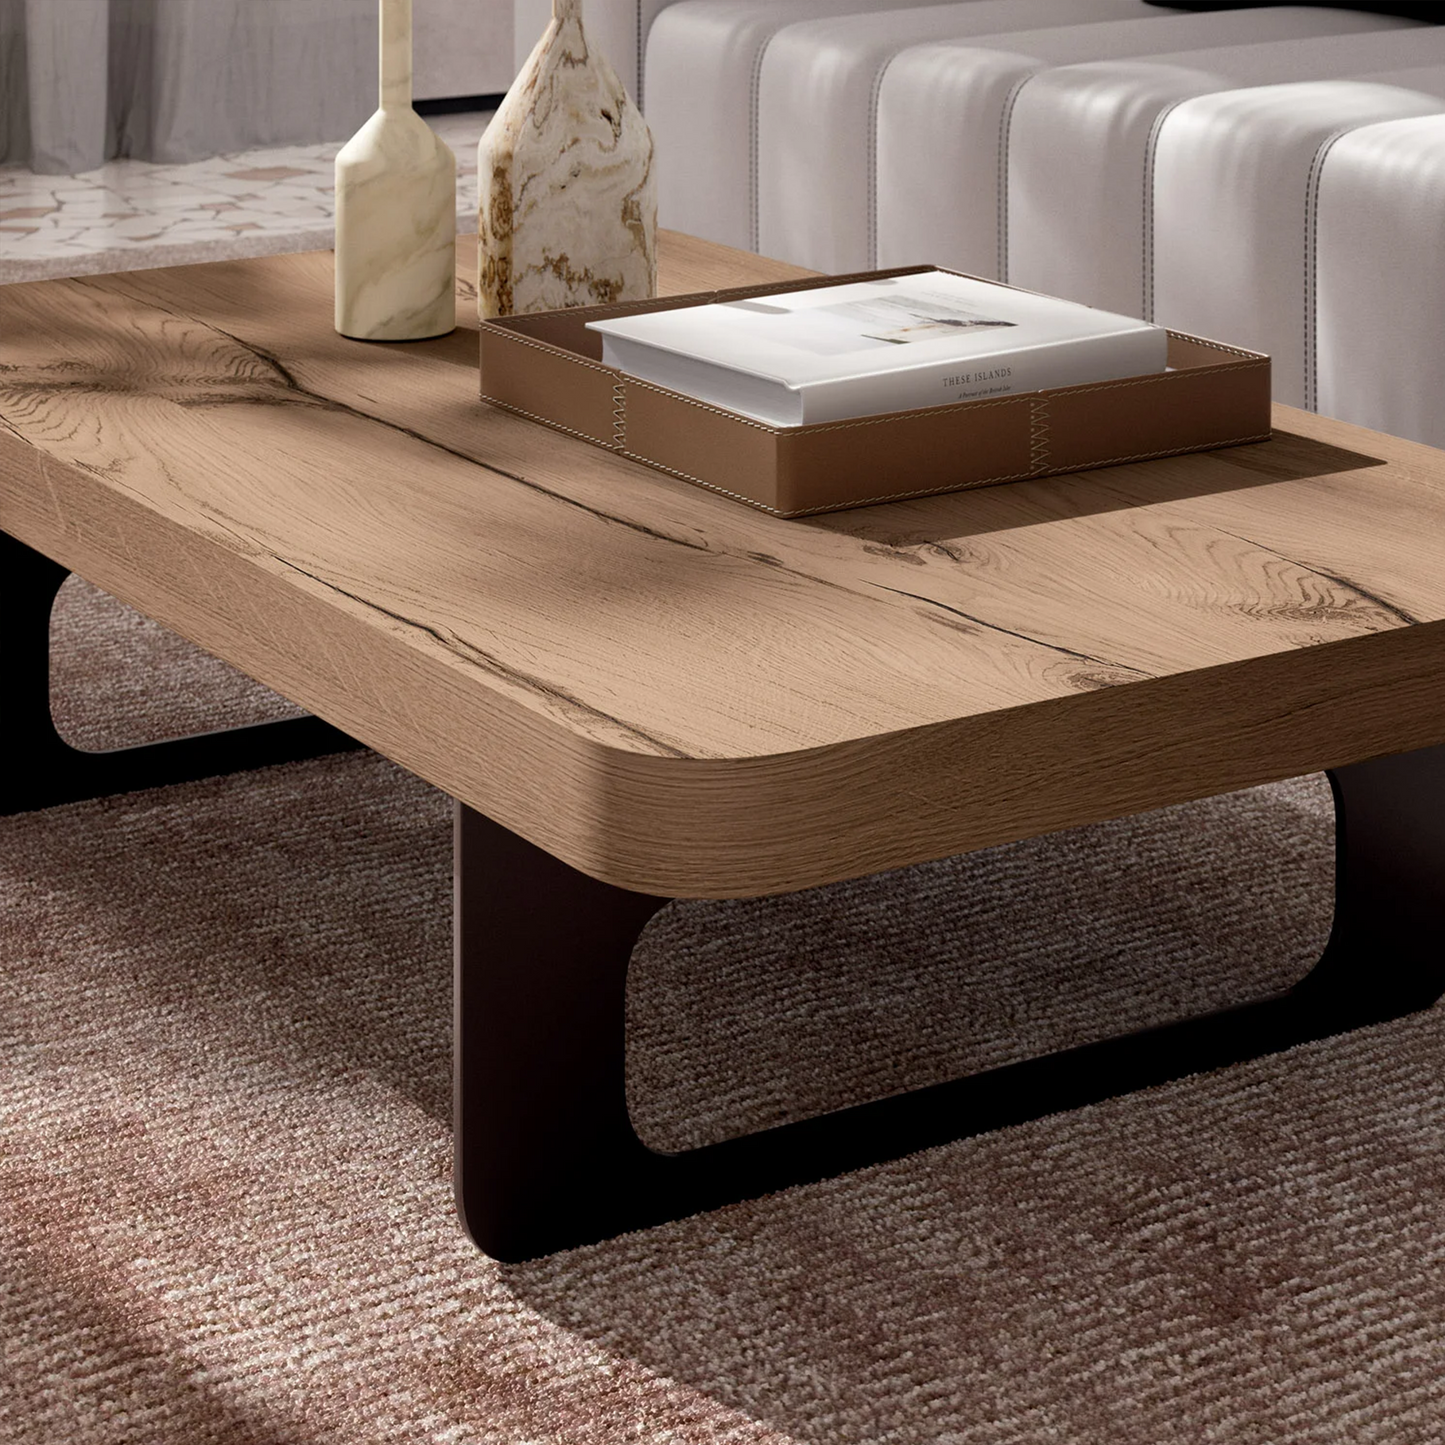 Close up of natural wood coffee table with metal legs.